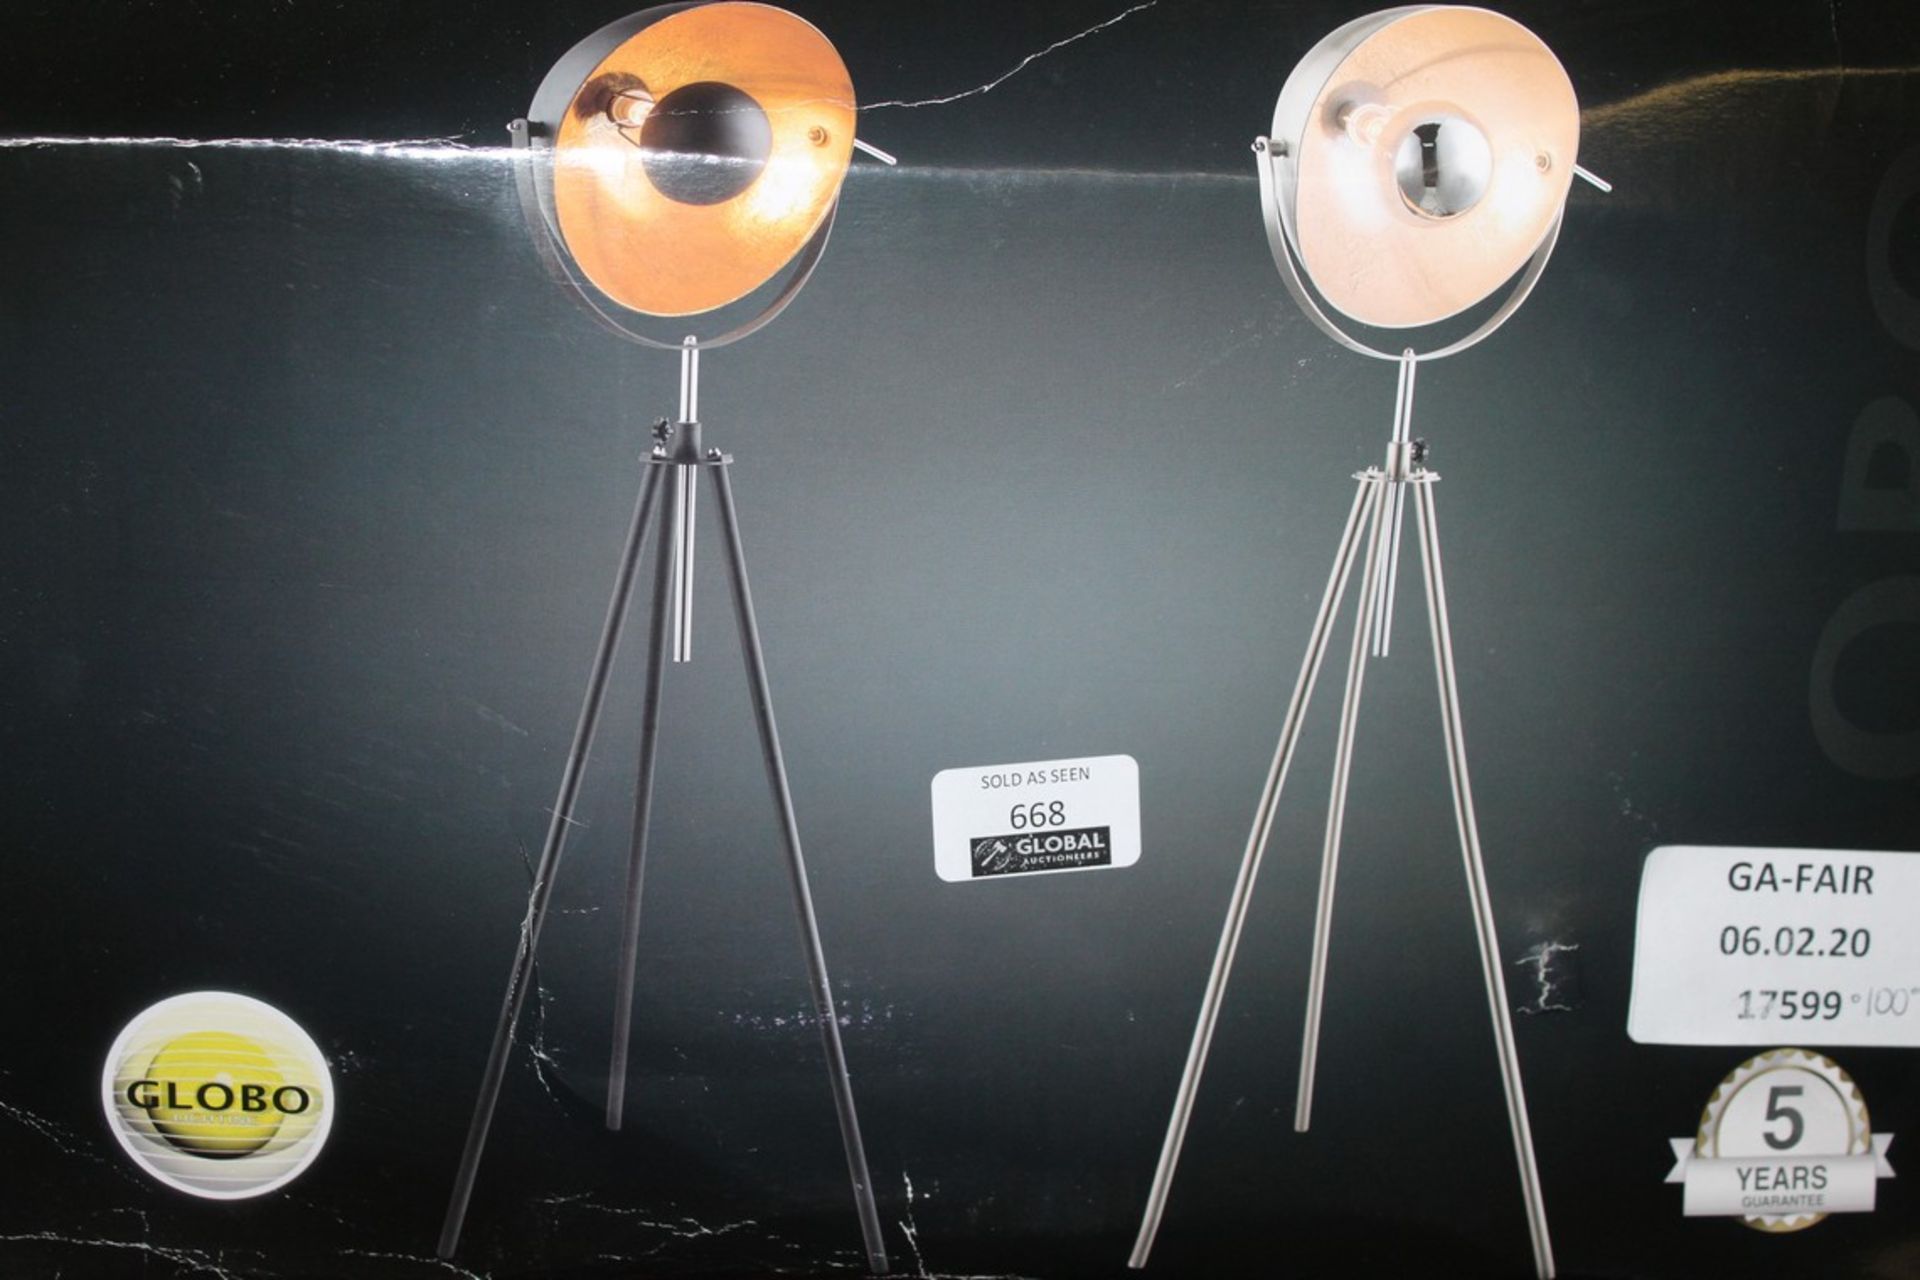 Boxed Globo Tripod Floor Standing Lamp RRP £100 (17599) (Public Viewing and Appraisals Available)